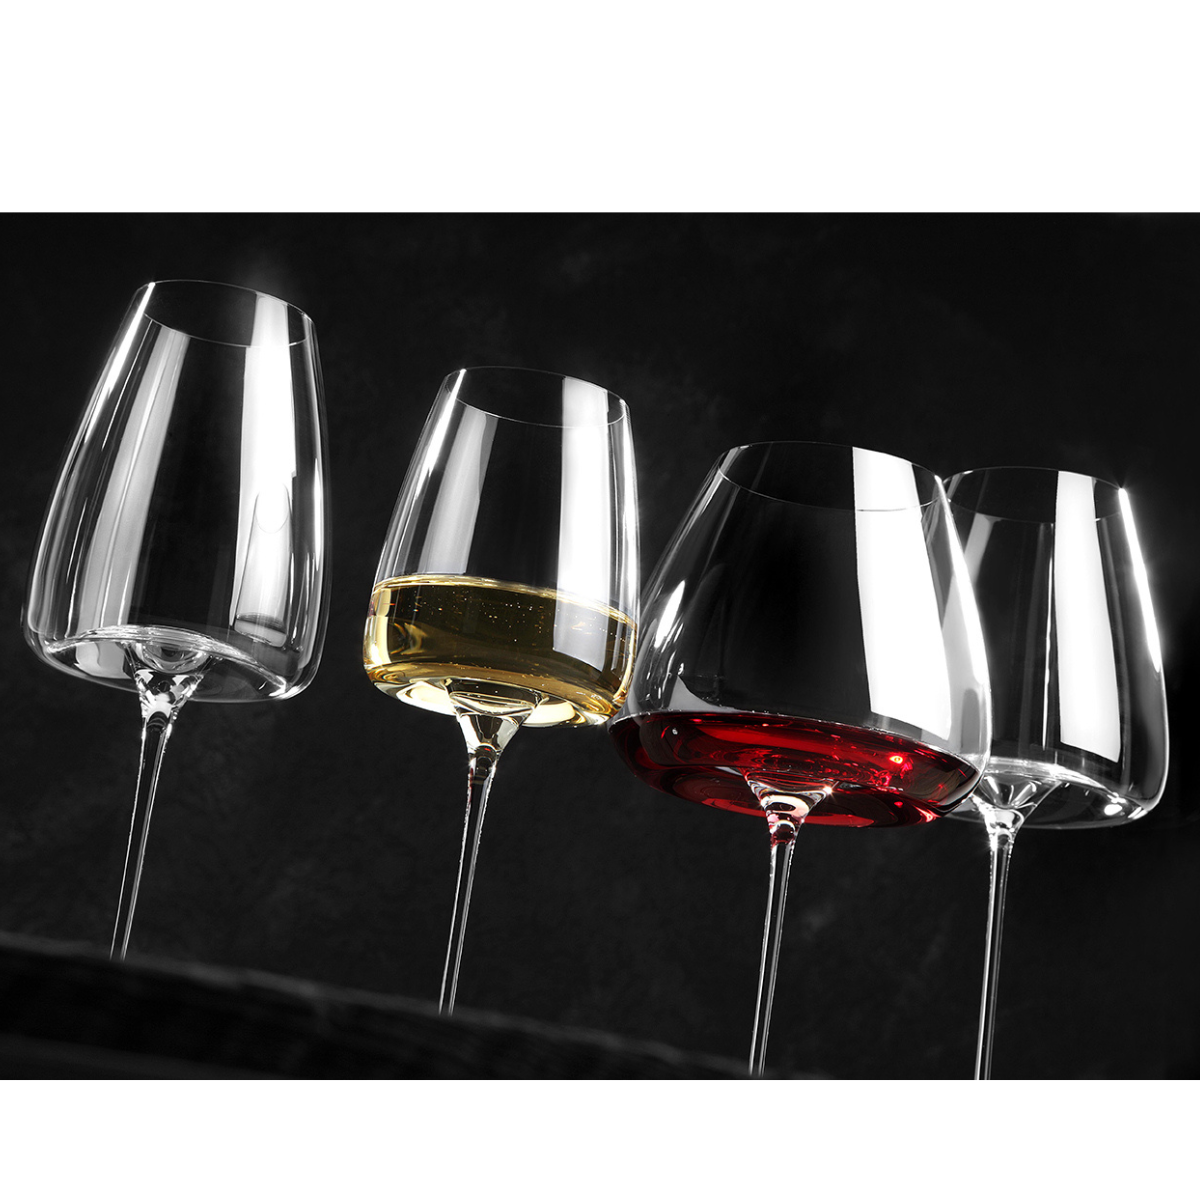 Ziher Vision Straight Wine Glass in Set with 2 Glasses Pack Lead-free crystal made in Hungary